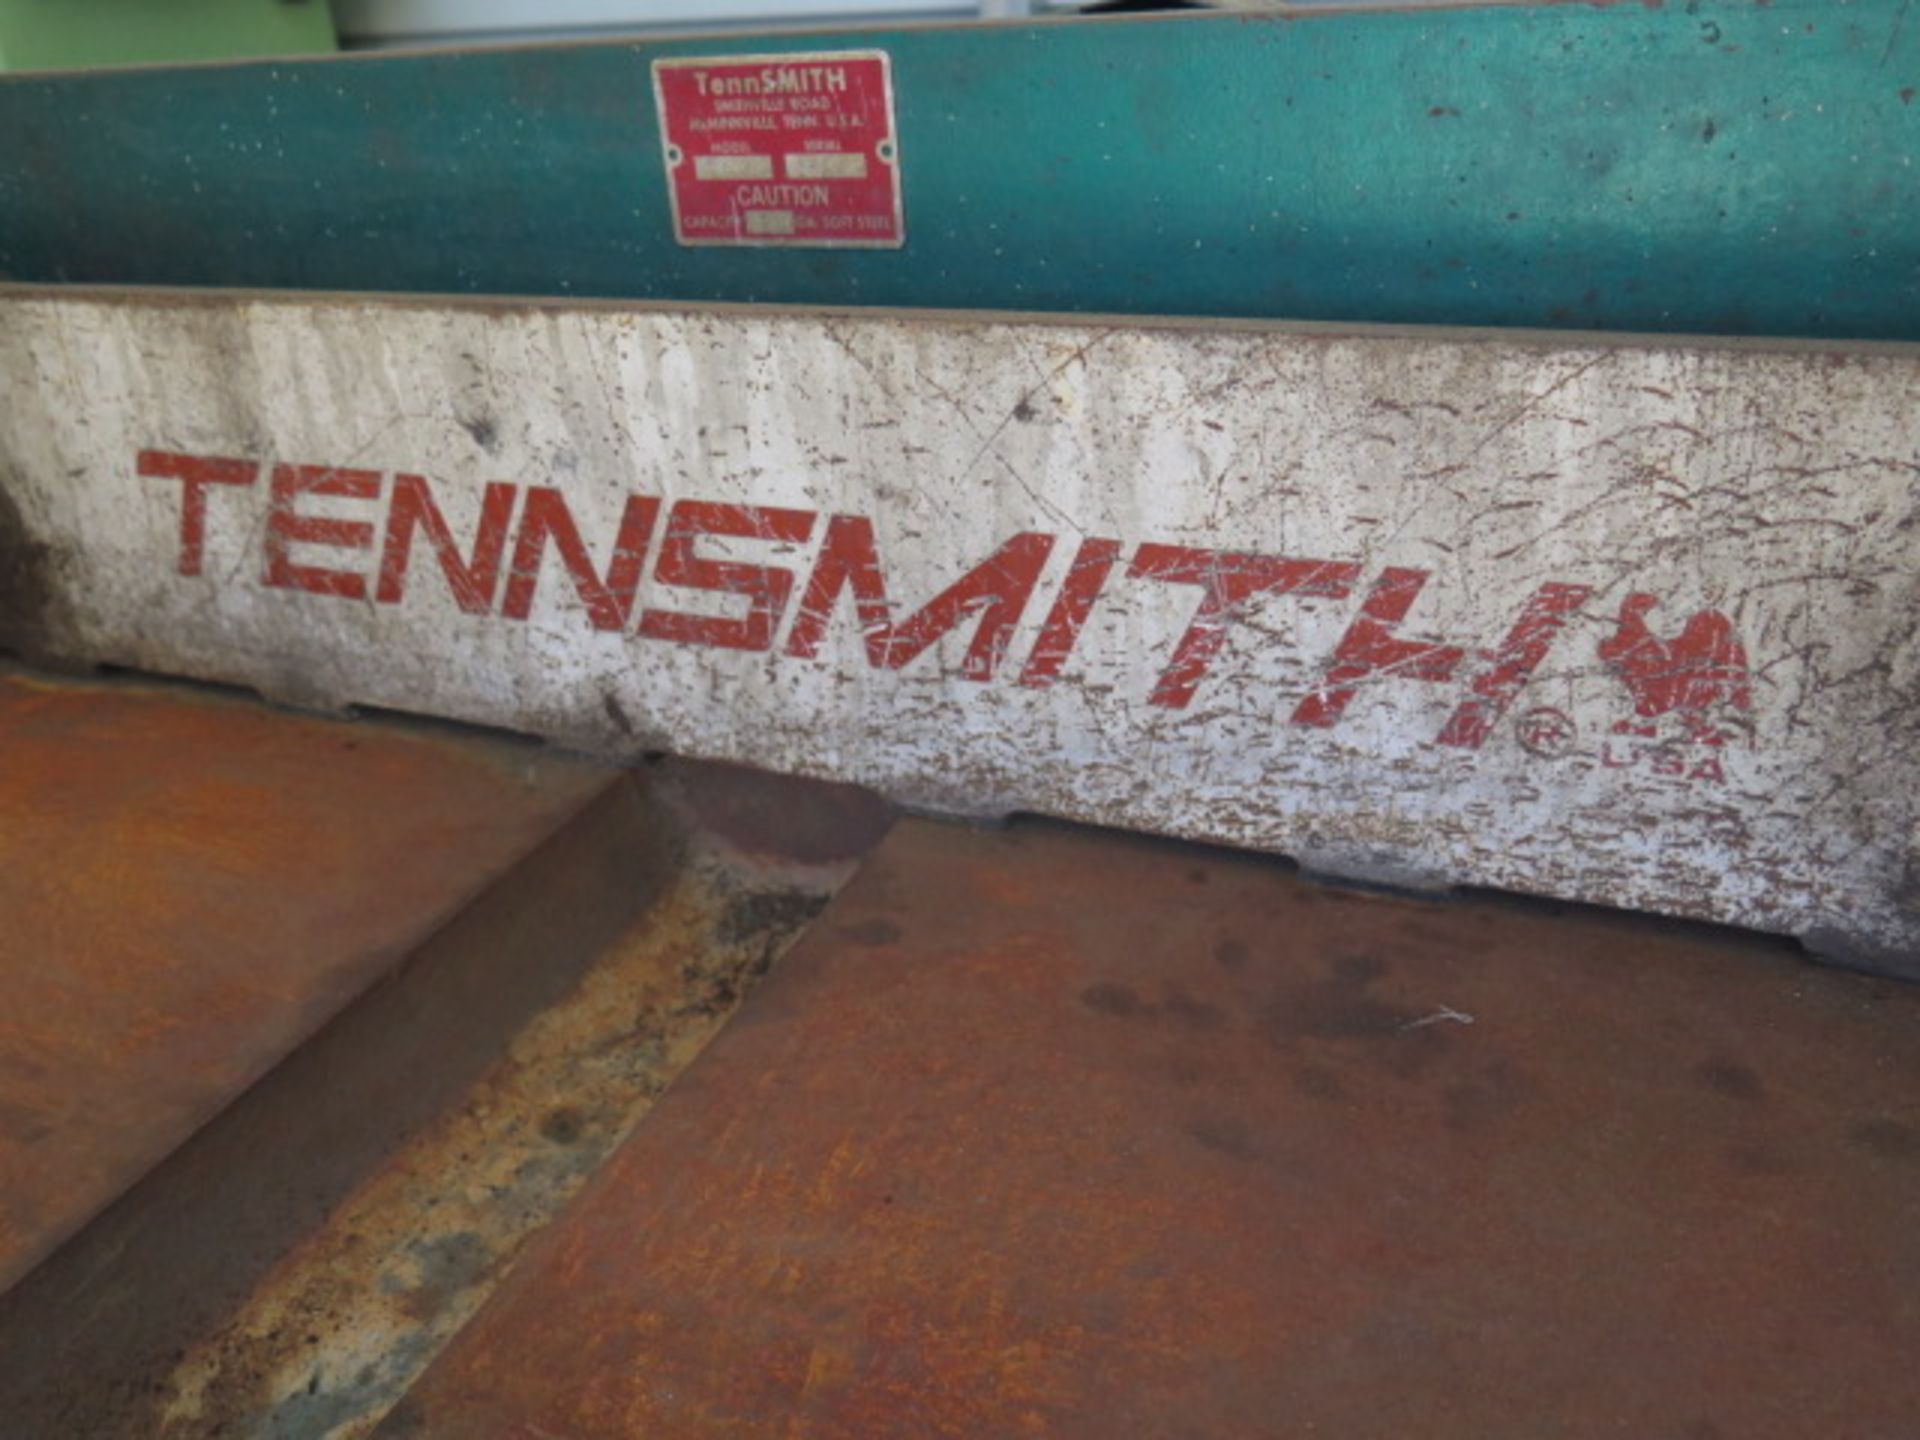 Tennsmith H52 52” Power Shear s/n 13948 w/ Dial Back Gauge (SOLD AS-IS - NO WARRANTY) - Image 3 of 9